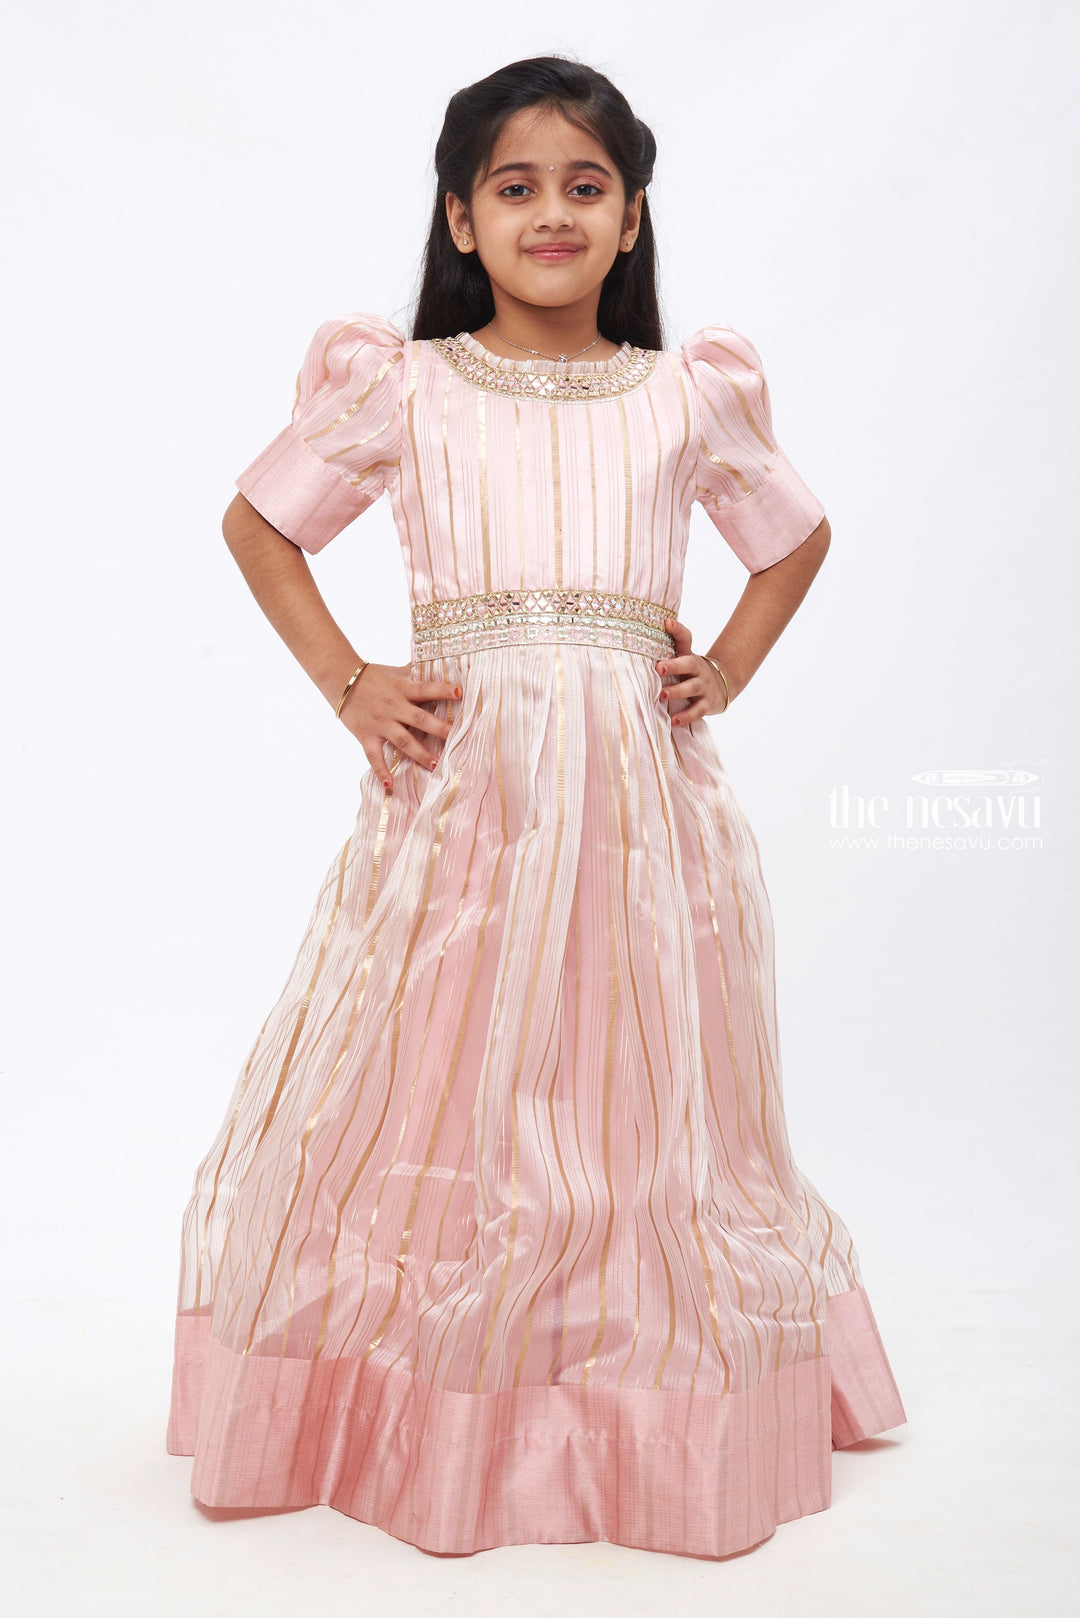 The Nesavu Girls Party Gown Ethereal Elegance: Pink Mirror Embroidered Anarkali Gown for Girls Nesavu 18 (2Y) / Pink / Organza GA149D-18 Girls Anarkali Gowns | Traditional Elegance for Festive Moments | The Nesavu